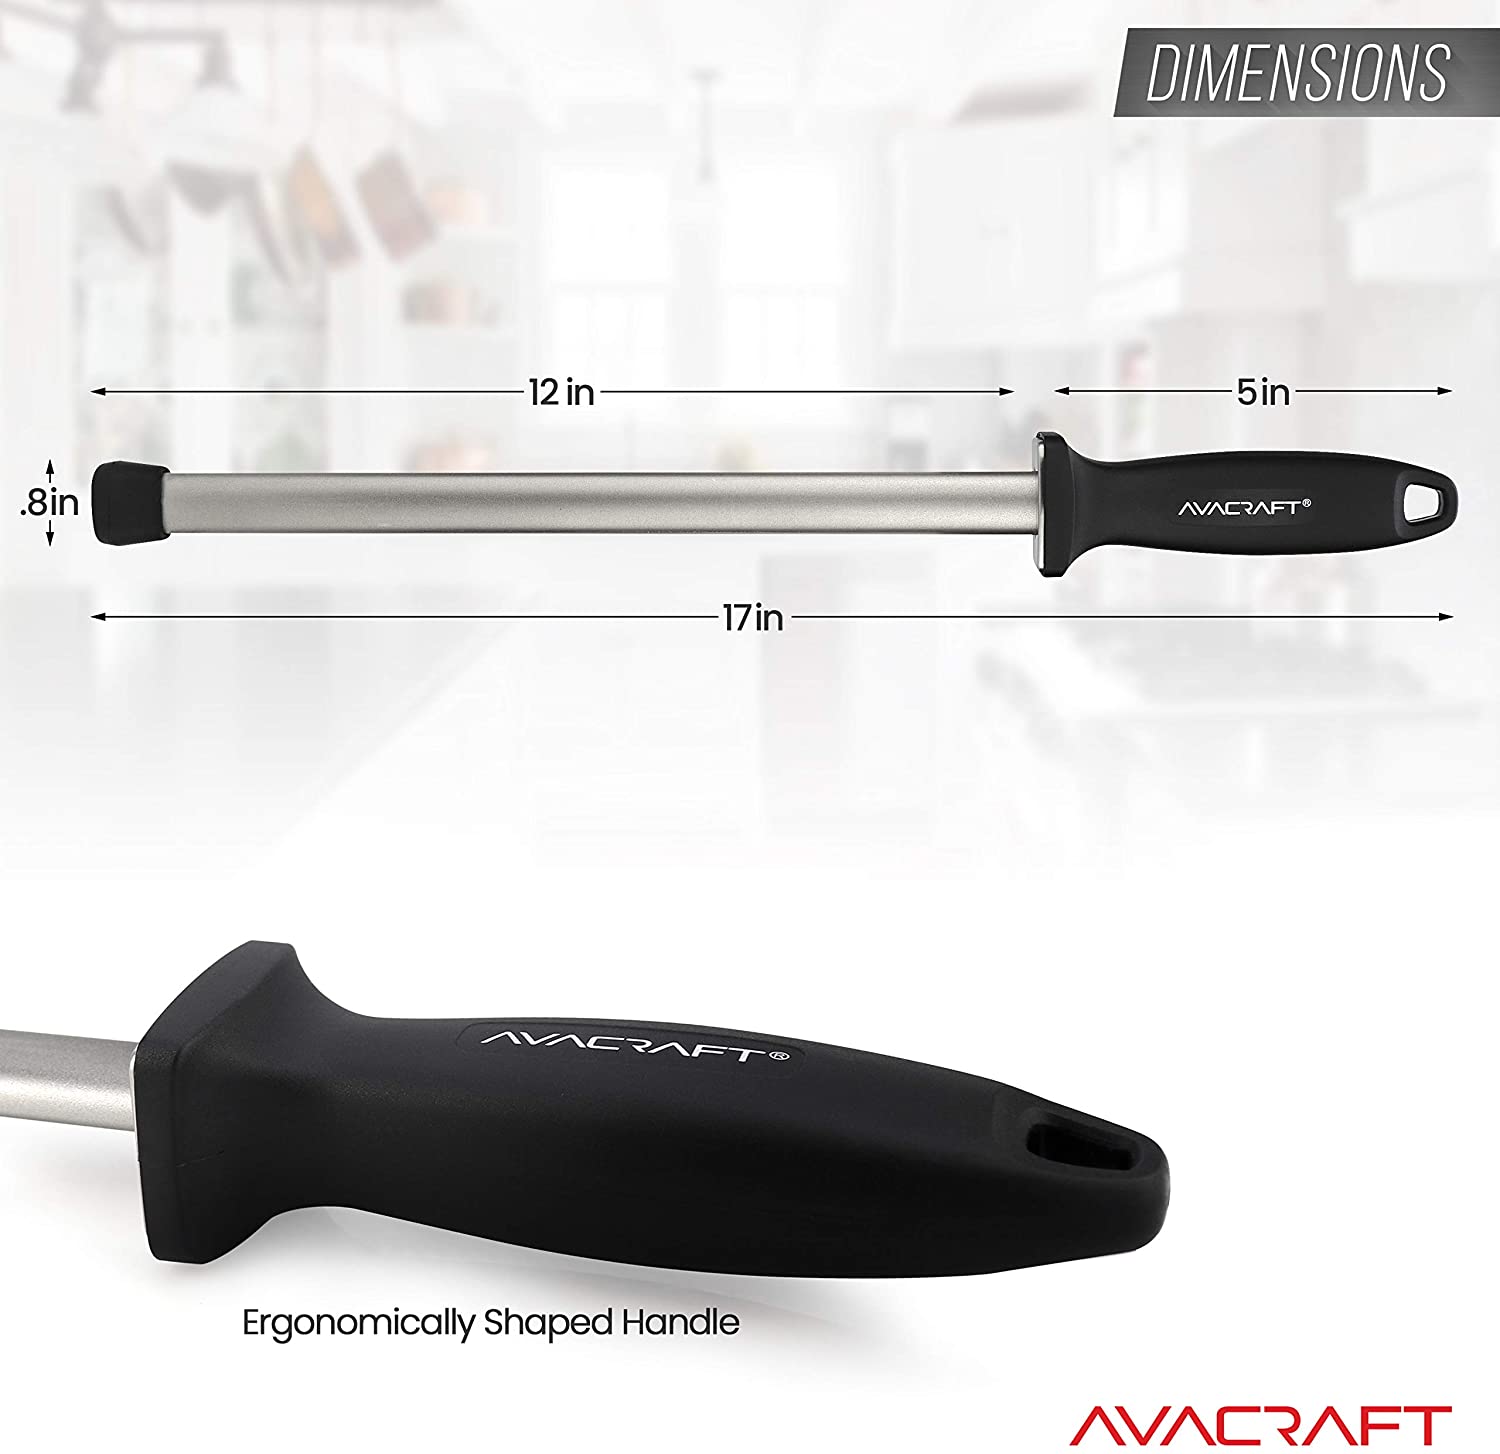 AVACRAFT 12 inch Knife Sharpener Rod with Ergonomic Handle for Firm Grip